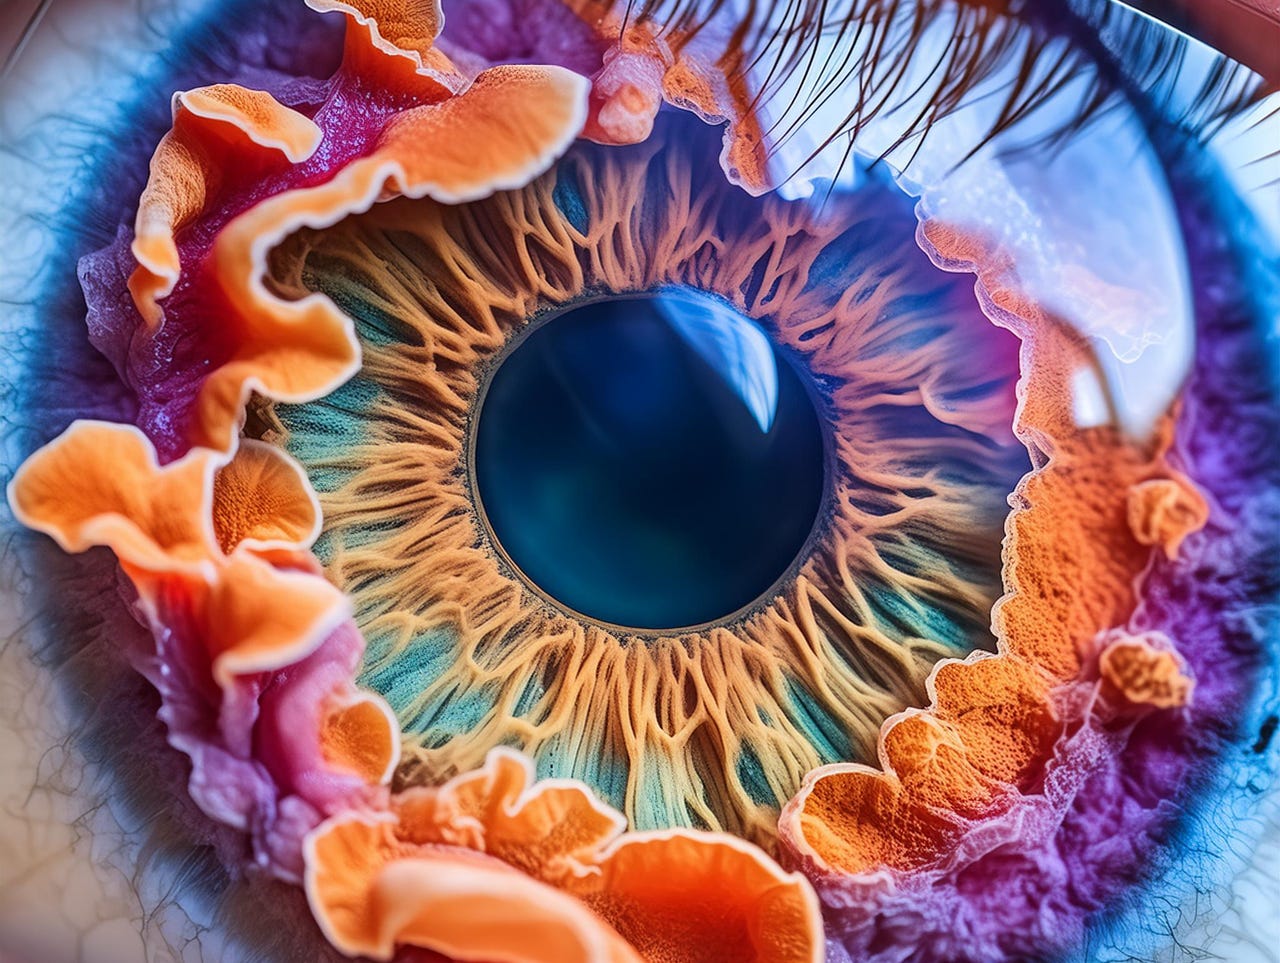 hyper-realistic-cordyceps-mushrooms-in-pupil-prompt-output-2